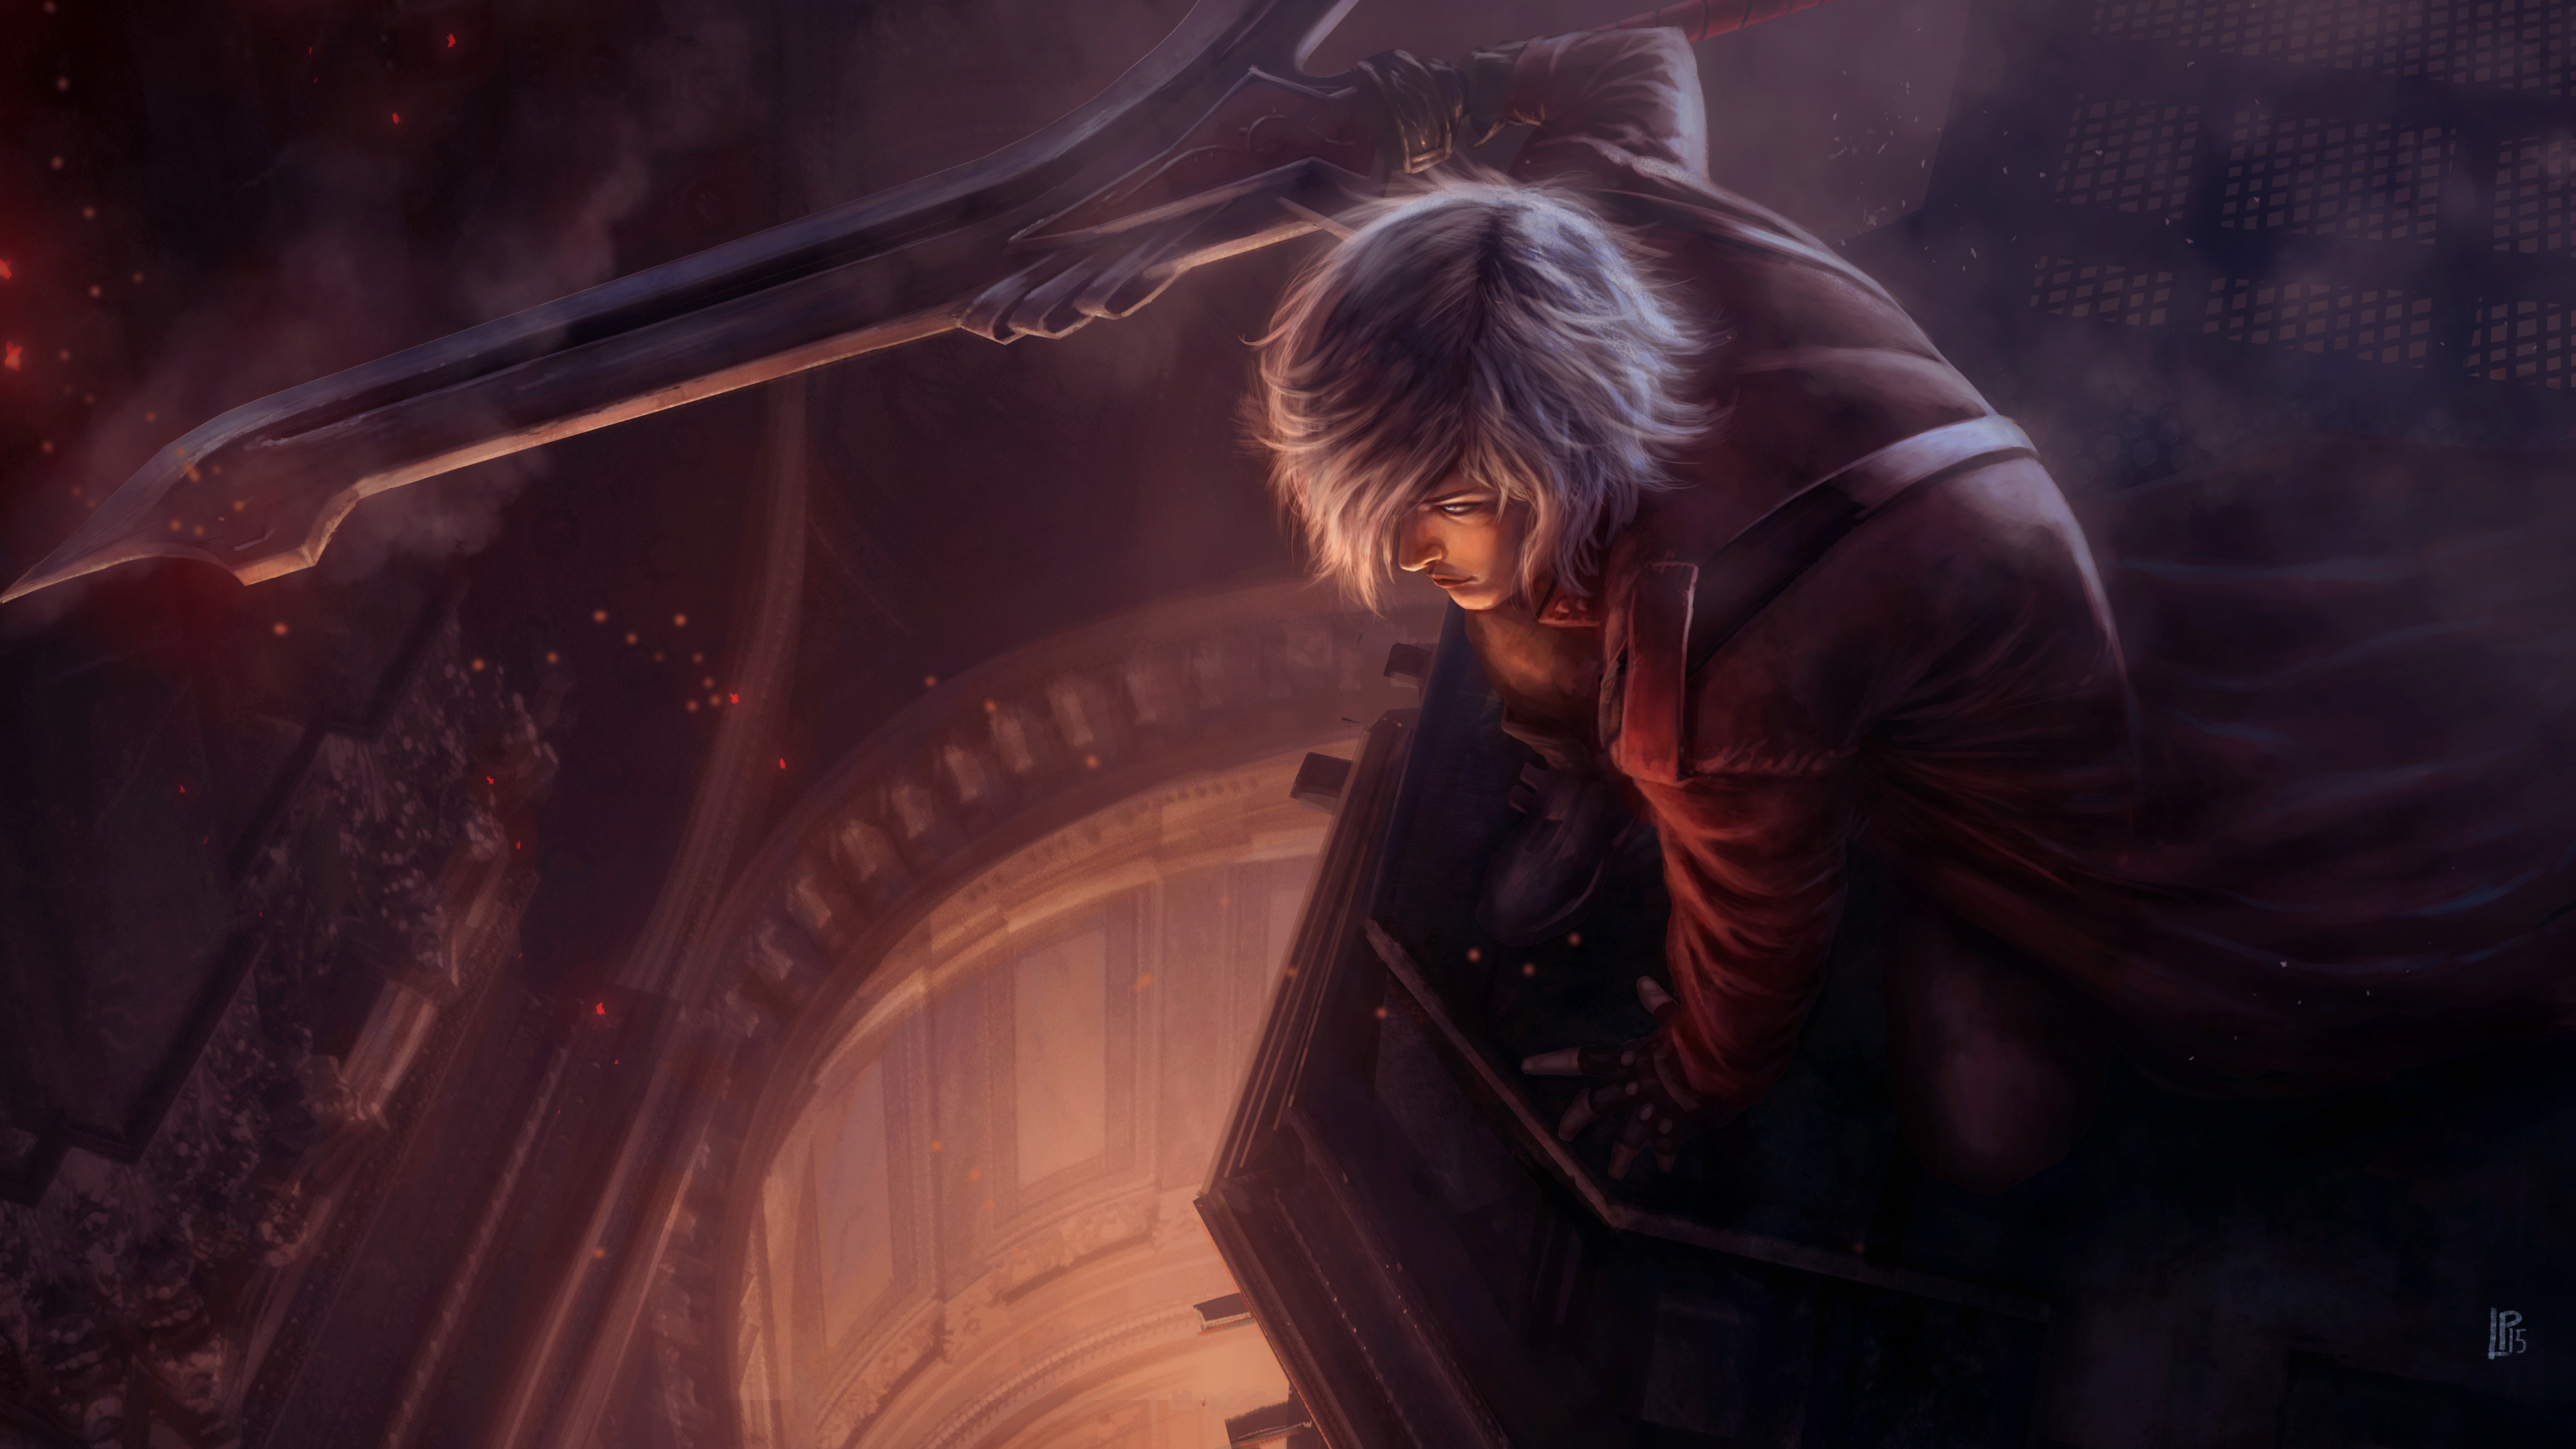 Devil May Cry, Devil May Cry 5, Dmc Devil May Cry, Devil May Cry 4, Dante. Wallpaper in 3840x2160 Resolution